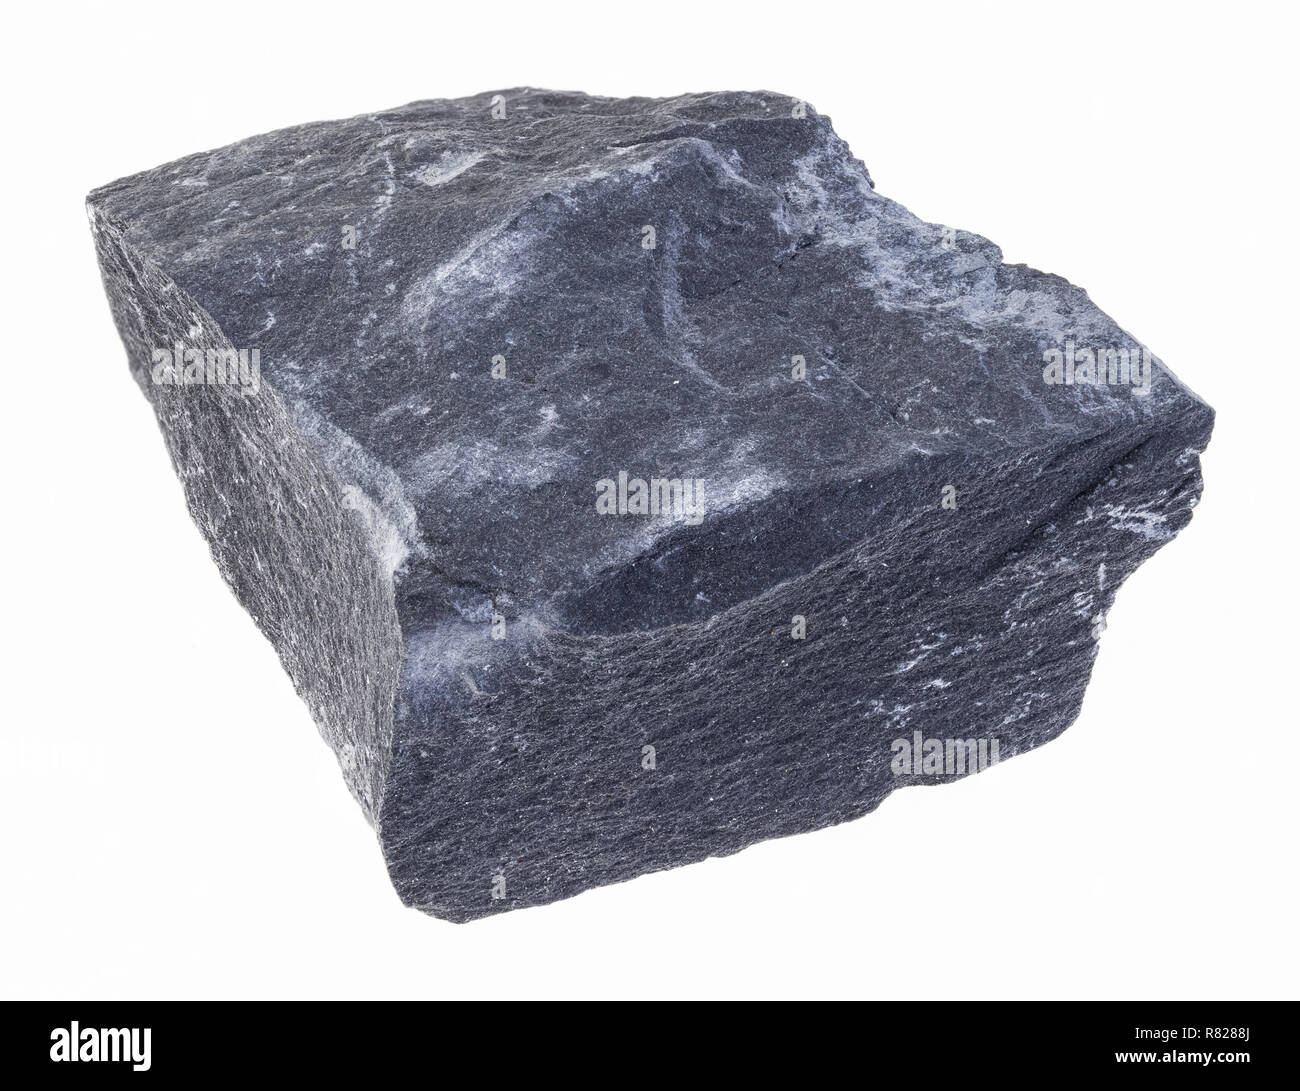 macro photography of natural mineral from geological collection - rough black argillite stone (mudstone) on white background Stock Photo